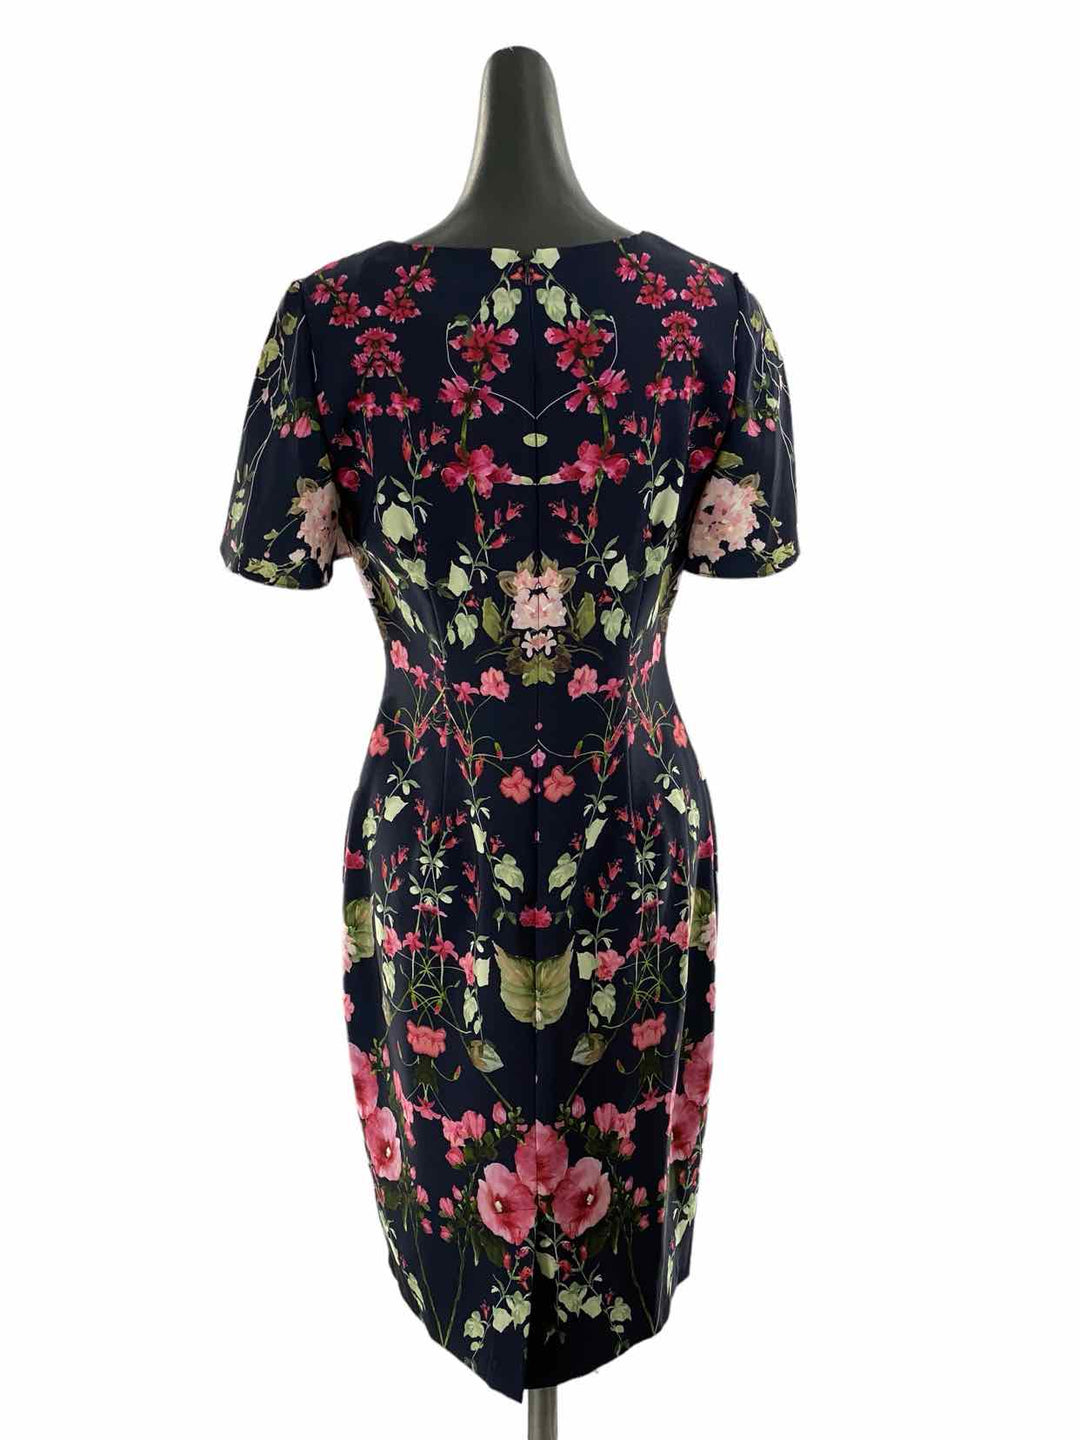 Adriana Papell Size 8 Blue Floral Dress